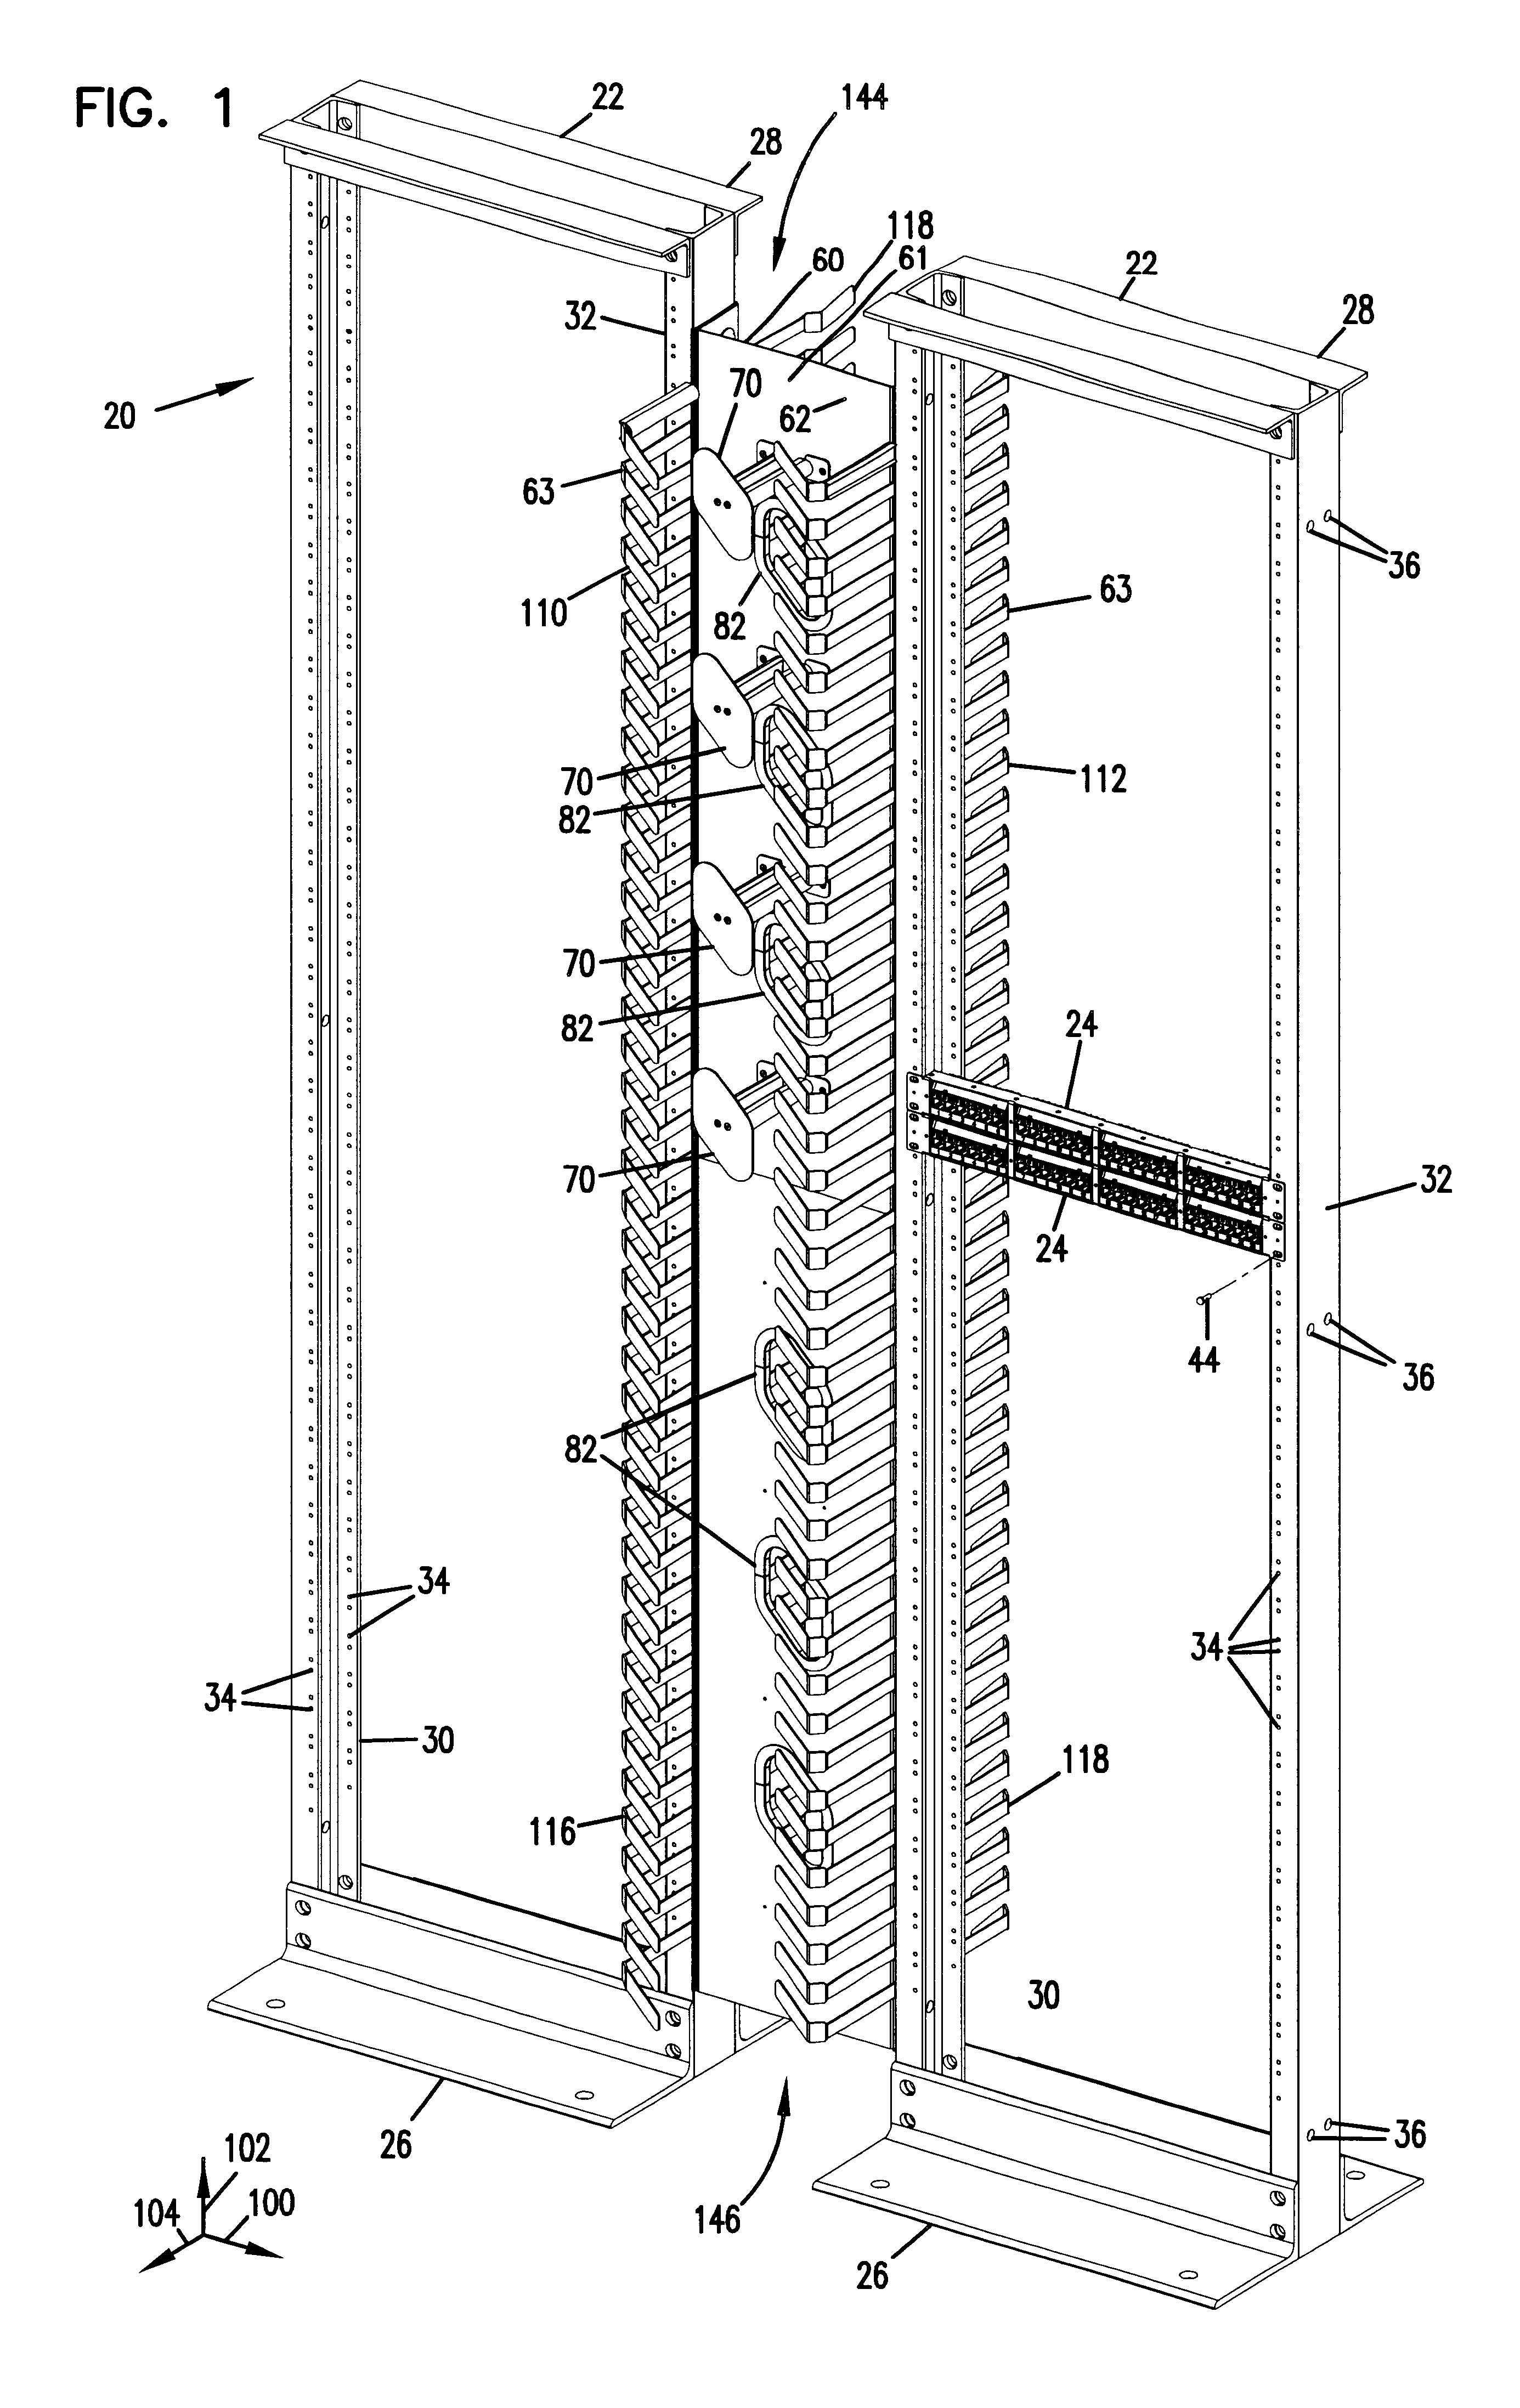 Vertical cable management system with ribcage structure